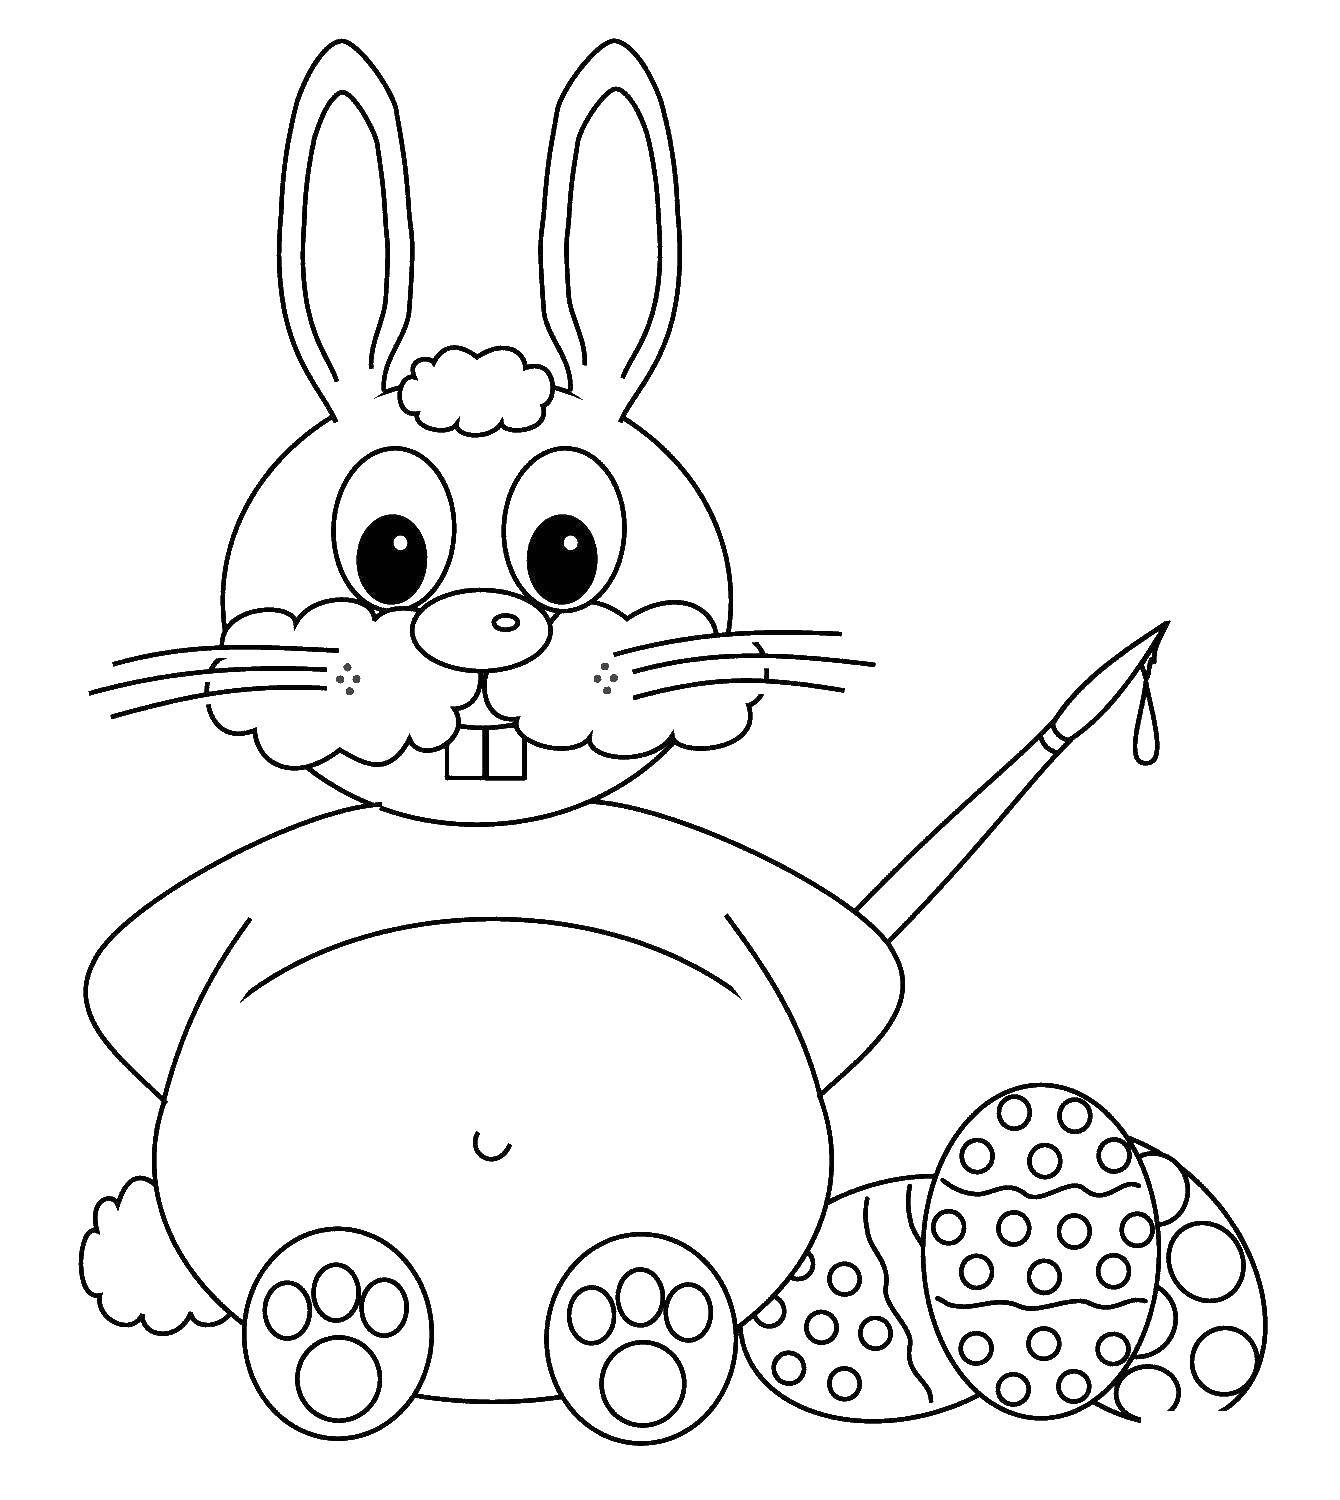 Coloring Easter Bunny with eggs. Category the Easter Bunny. Tags:  Easter, eggs, rabbit.